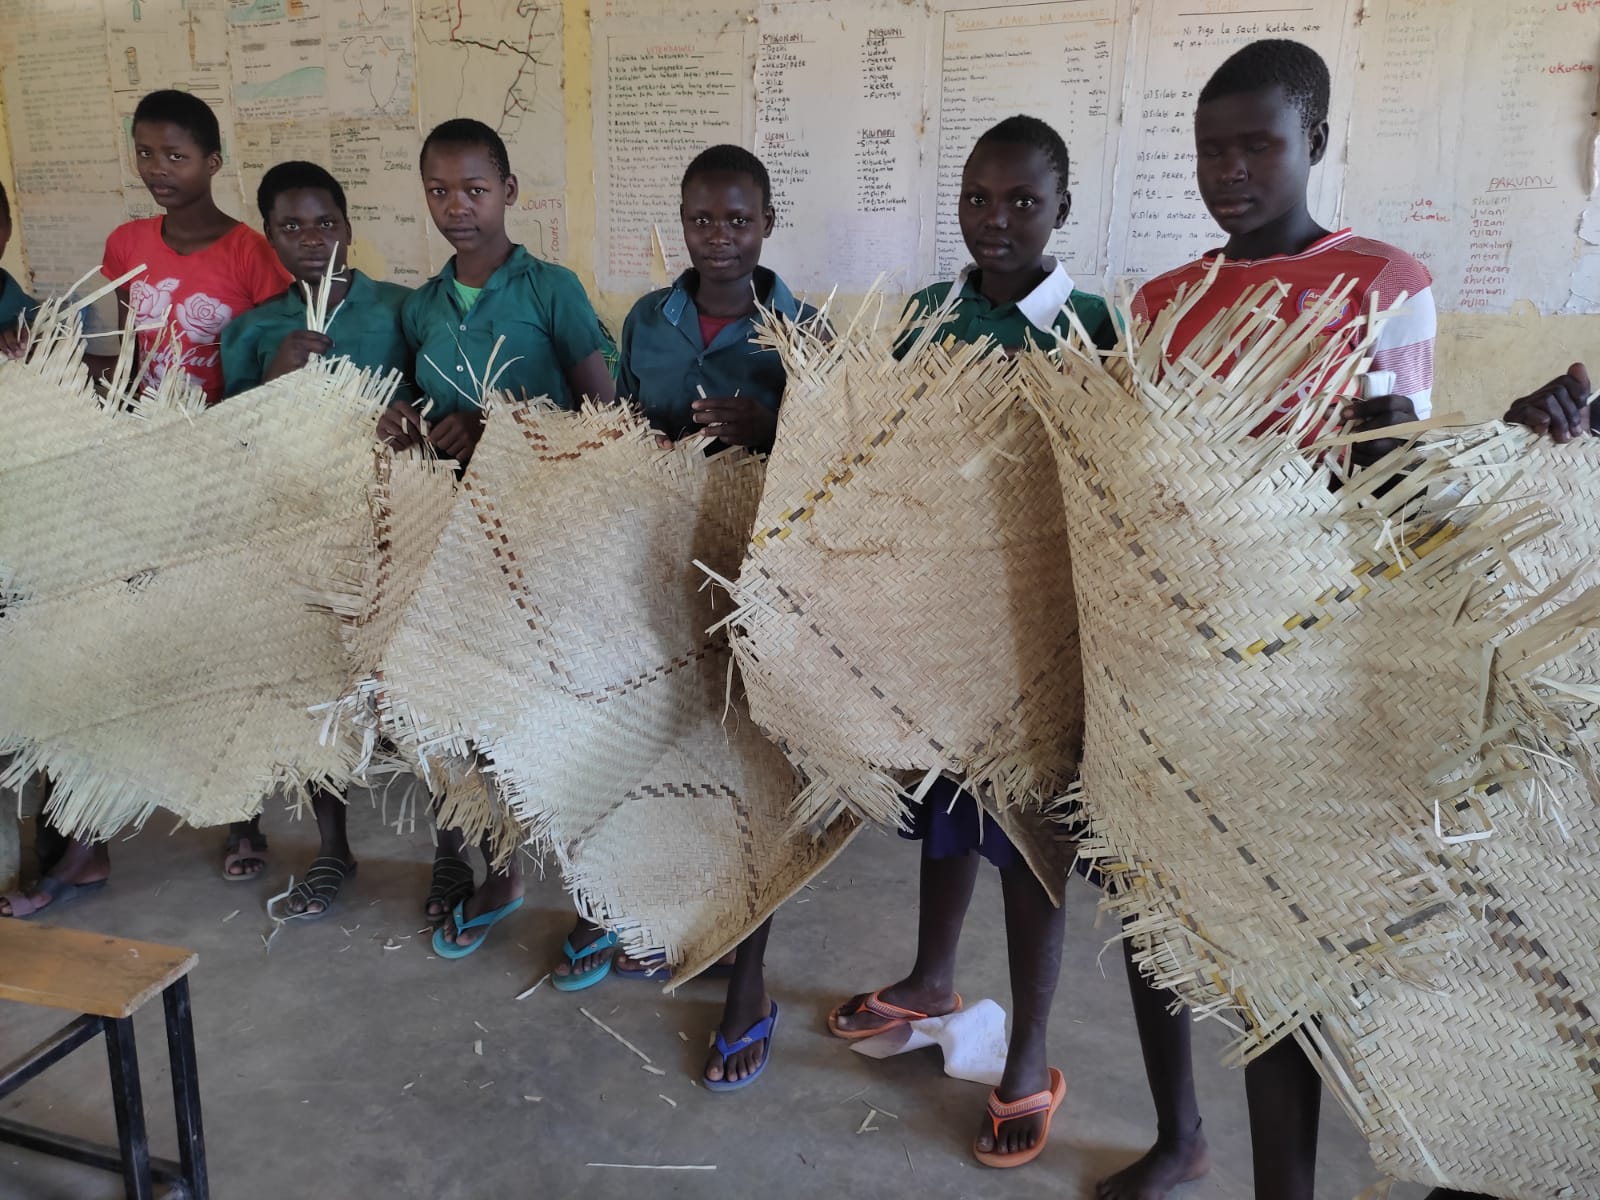 Some of the girls who board in the school display their beddings.